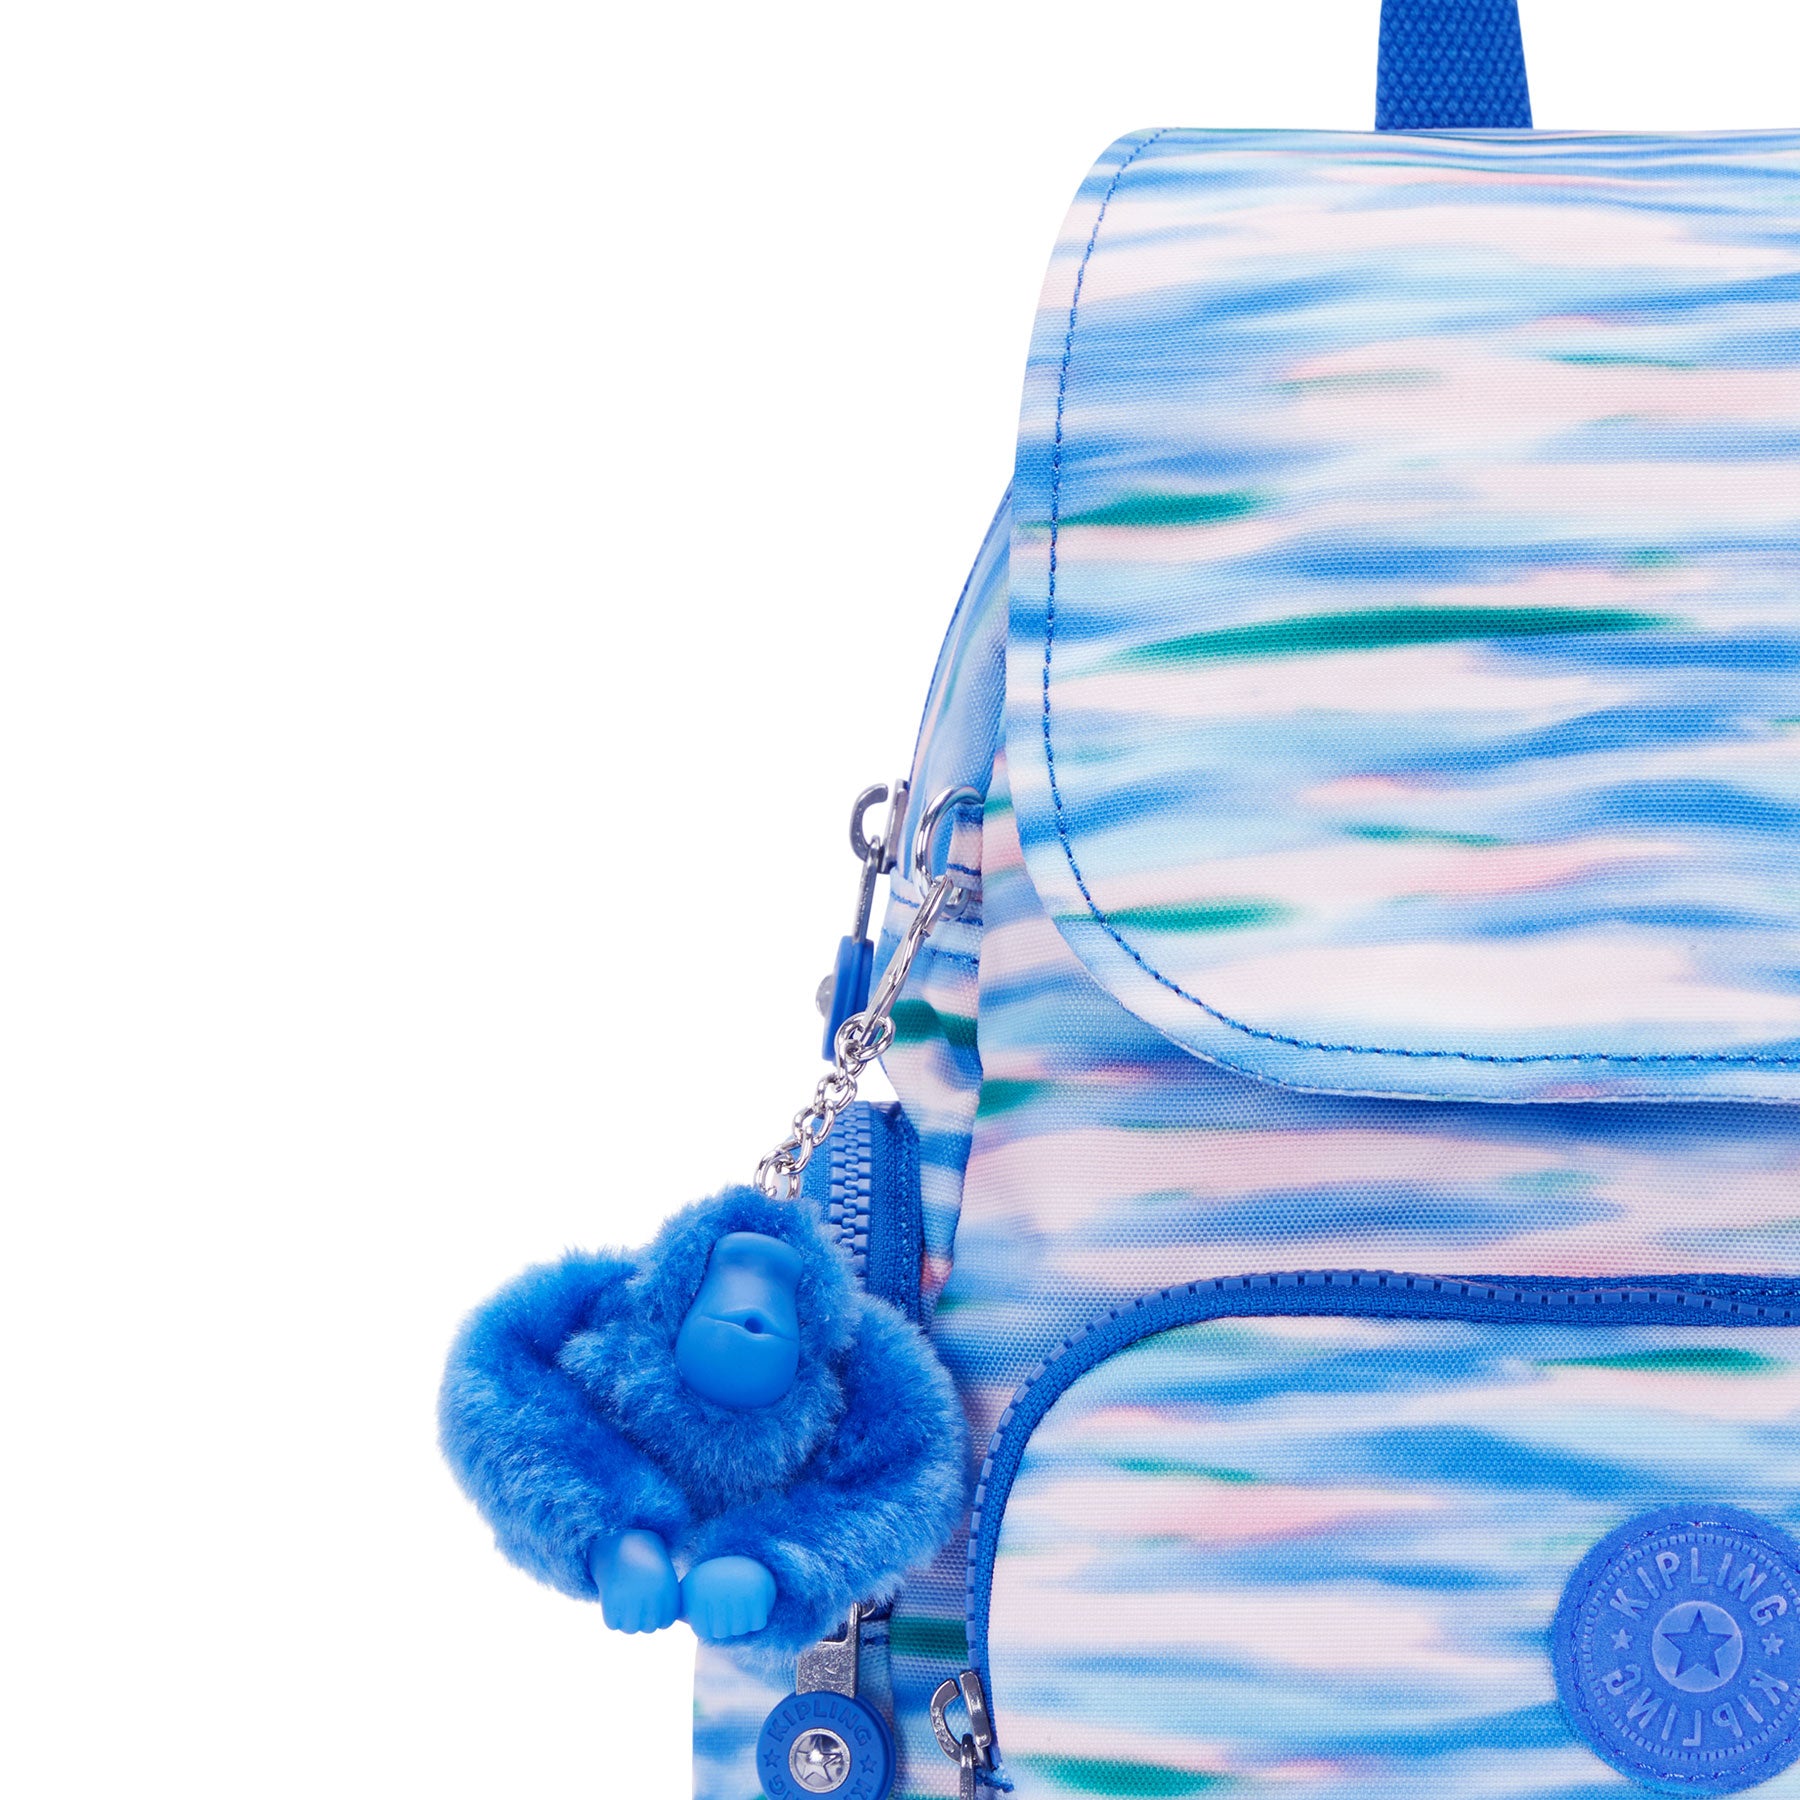 Kipling City Zip Small  Backpack Diluted Blue